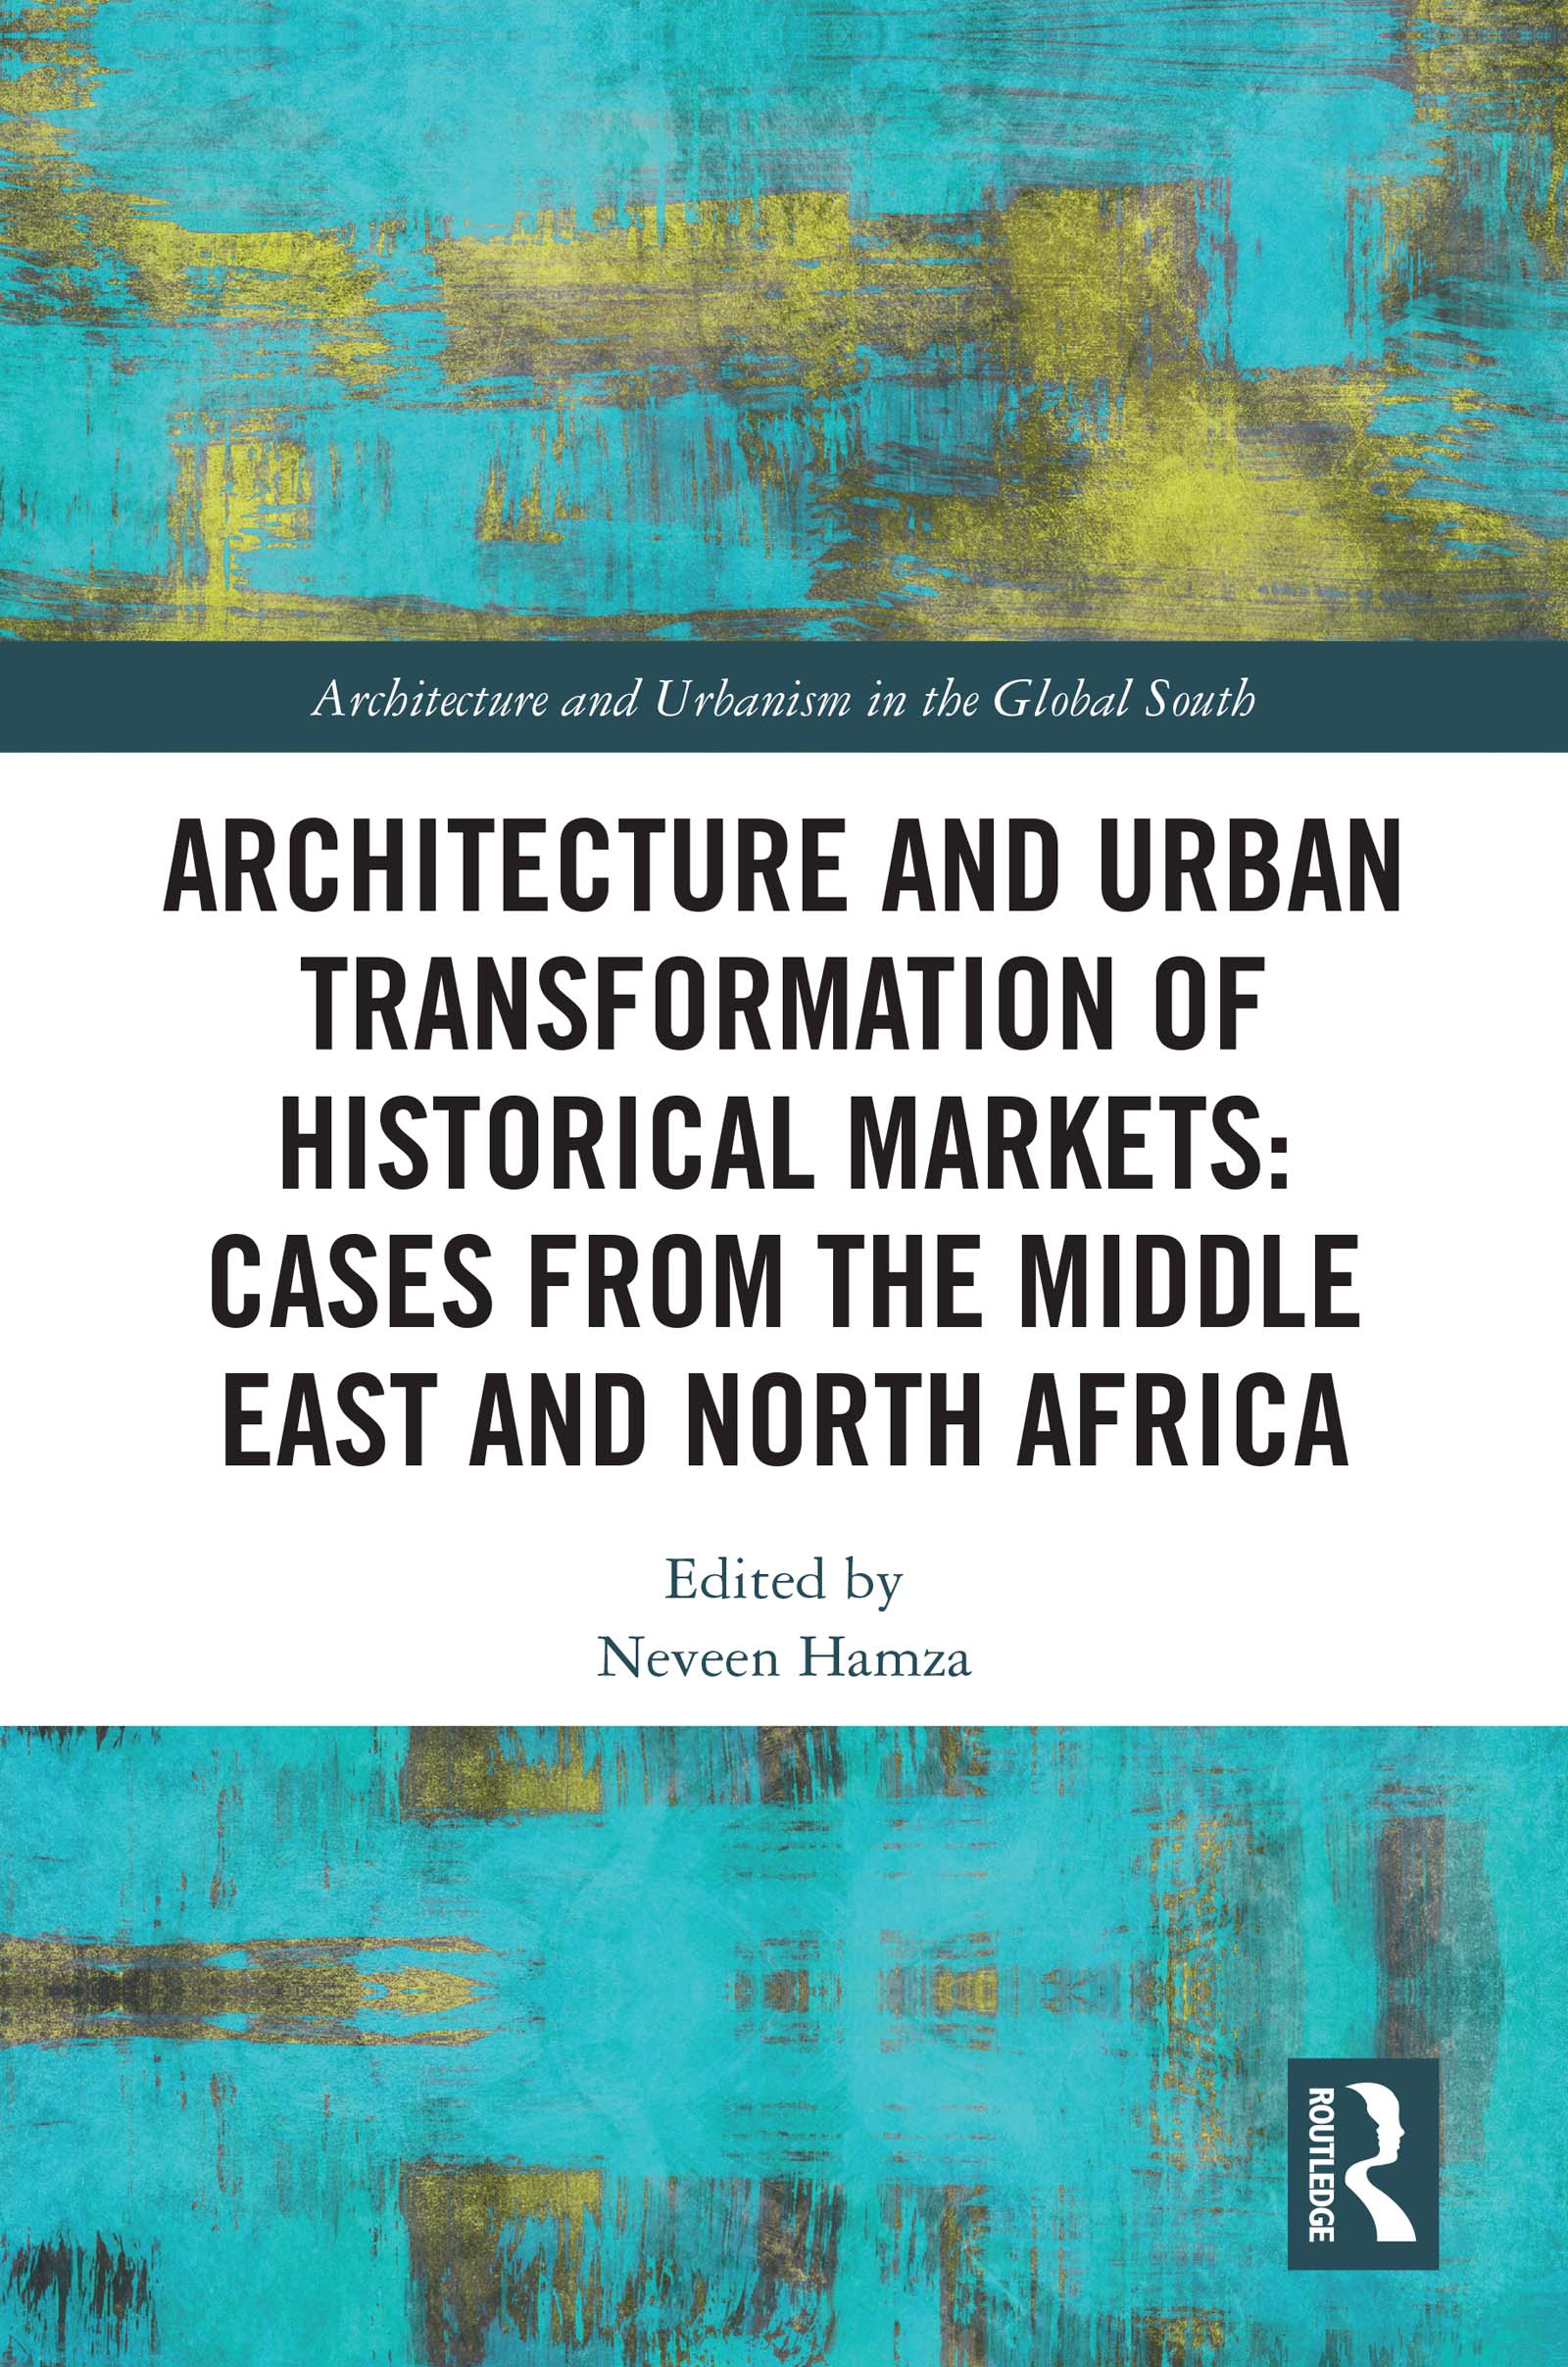 Architecture and Urban Transformation of Historical Markets